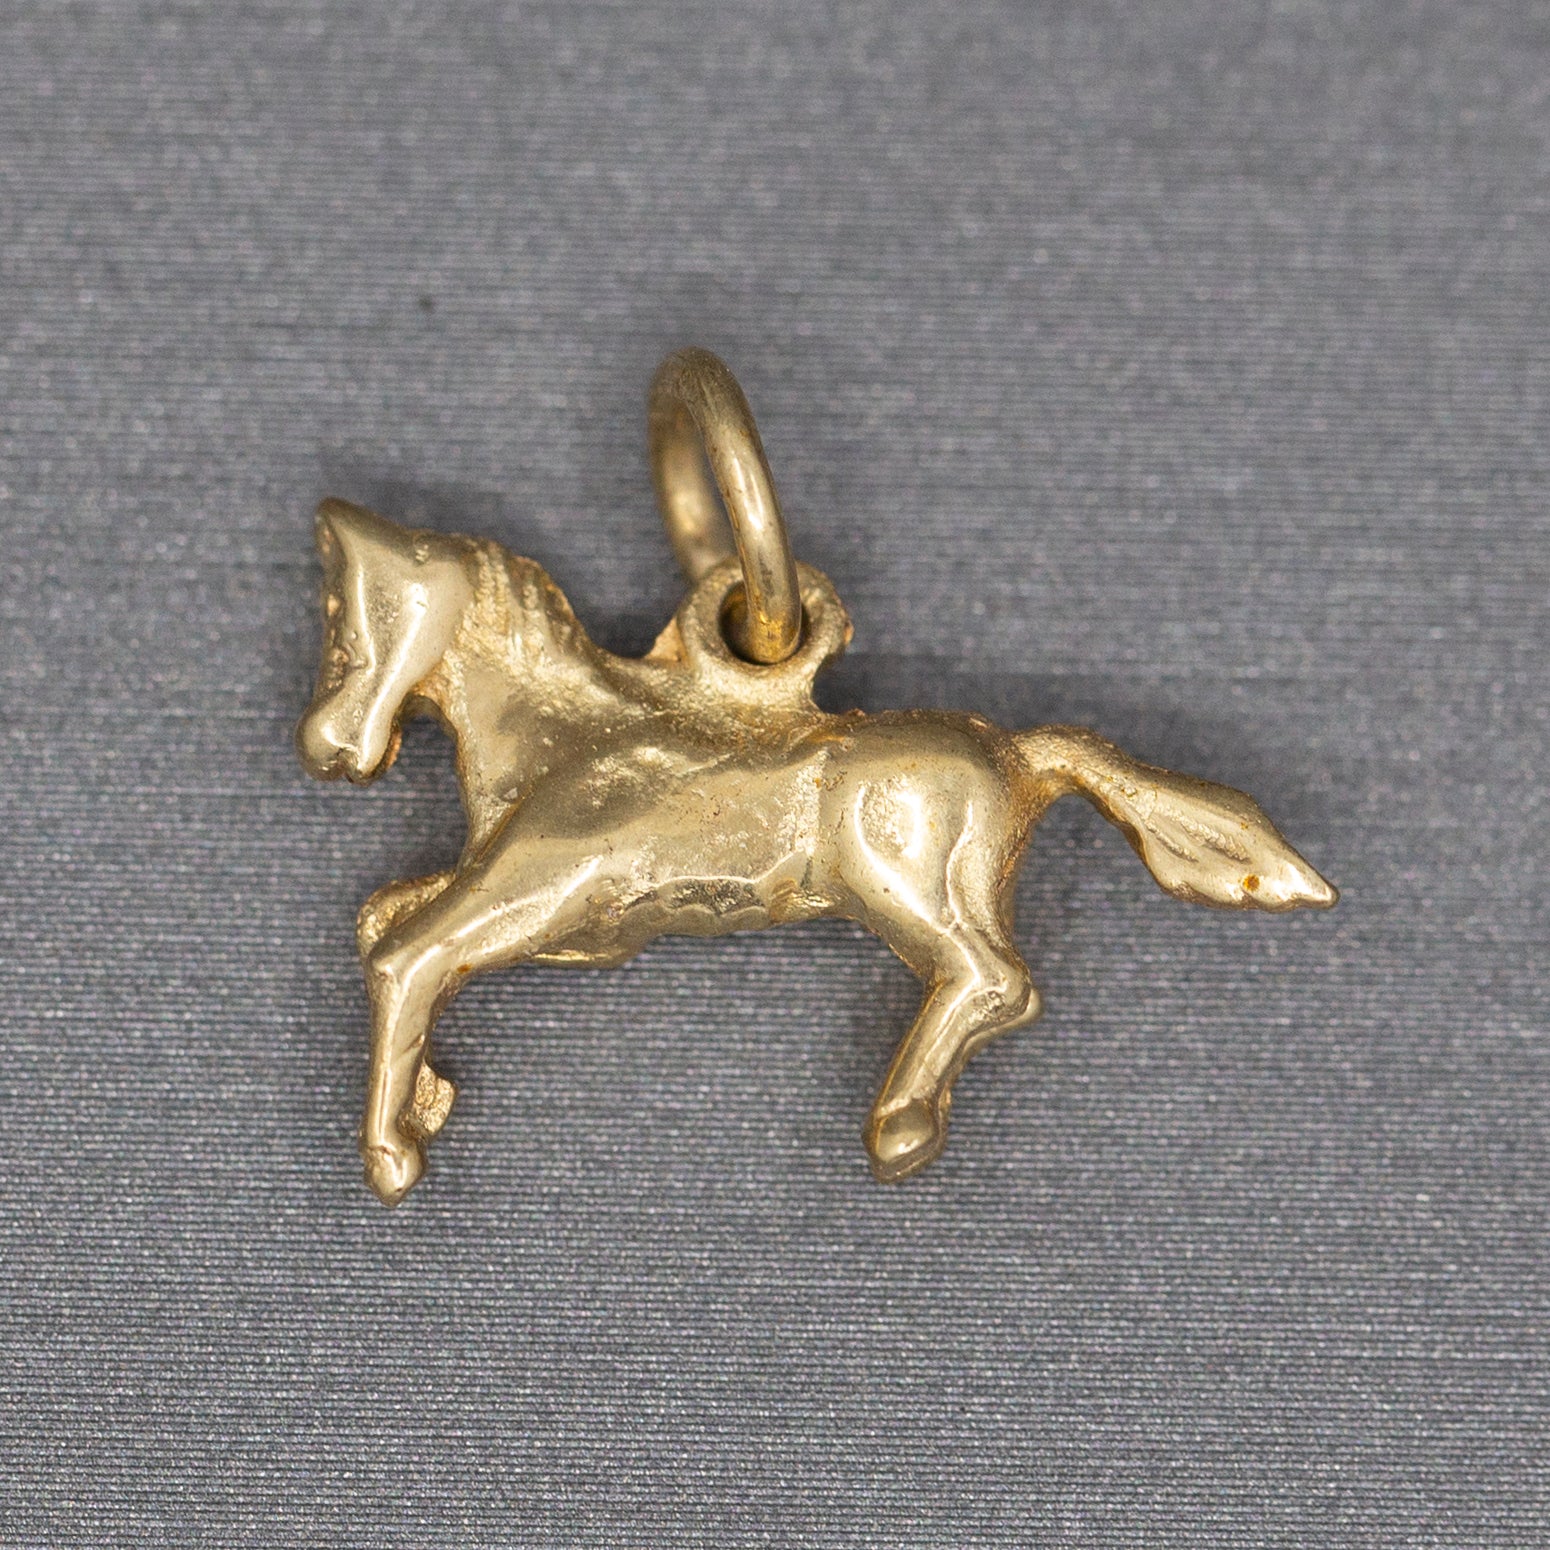 Solid Cast Vintage Horse Charm Pendant in 14k Yellow Gold